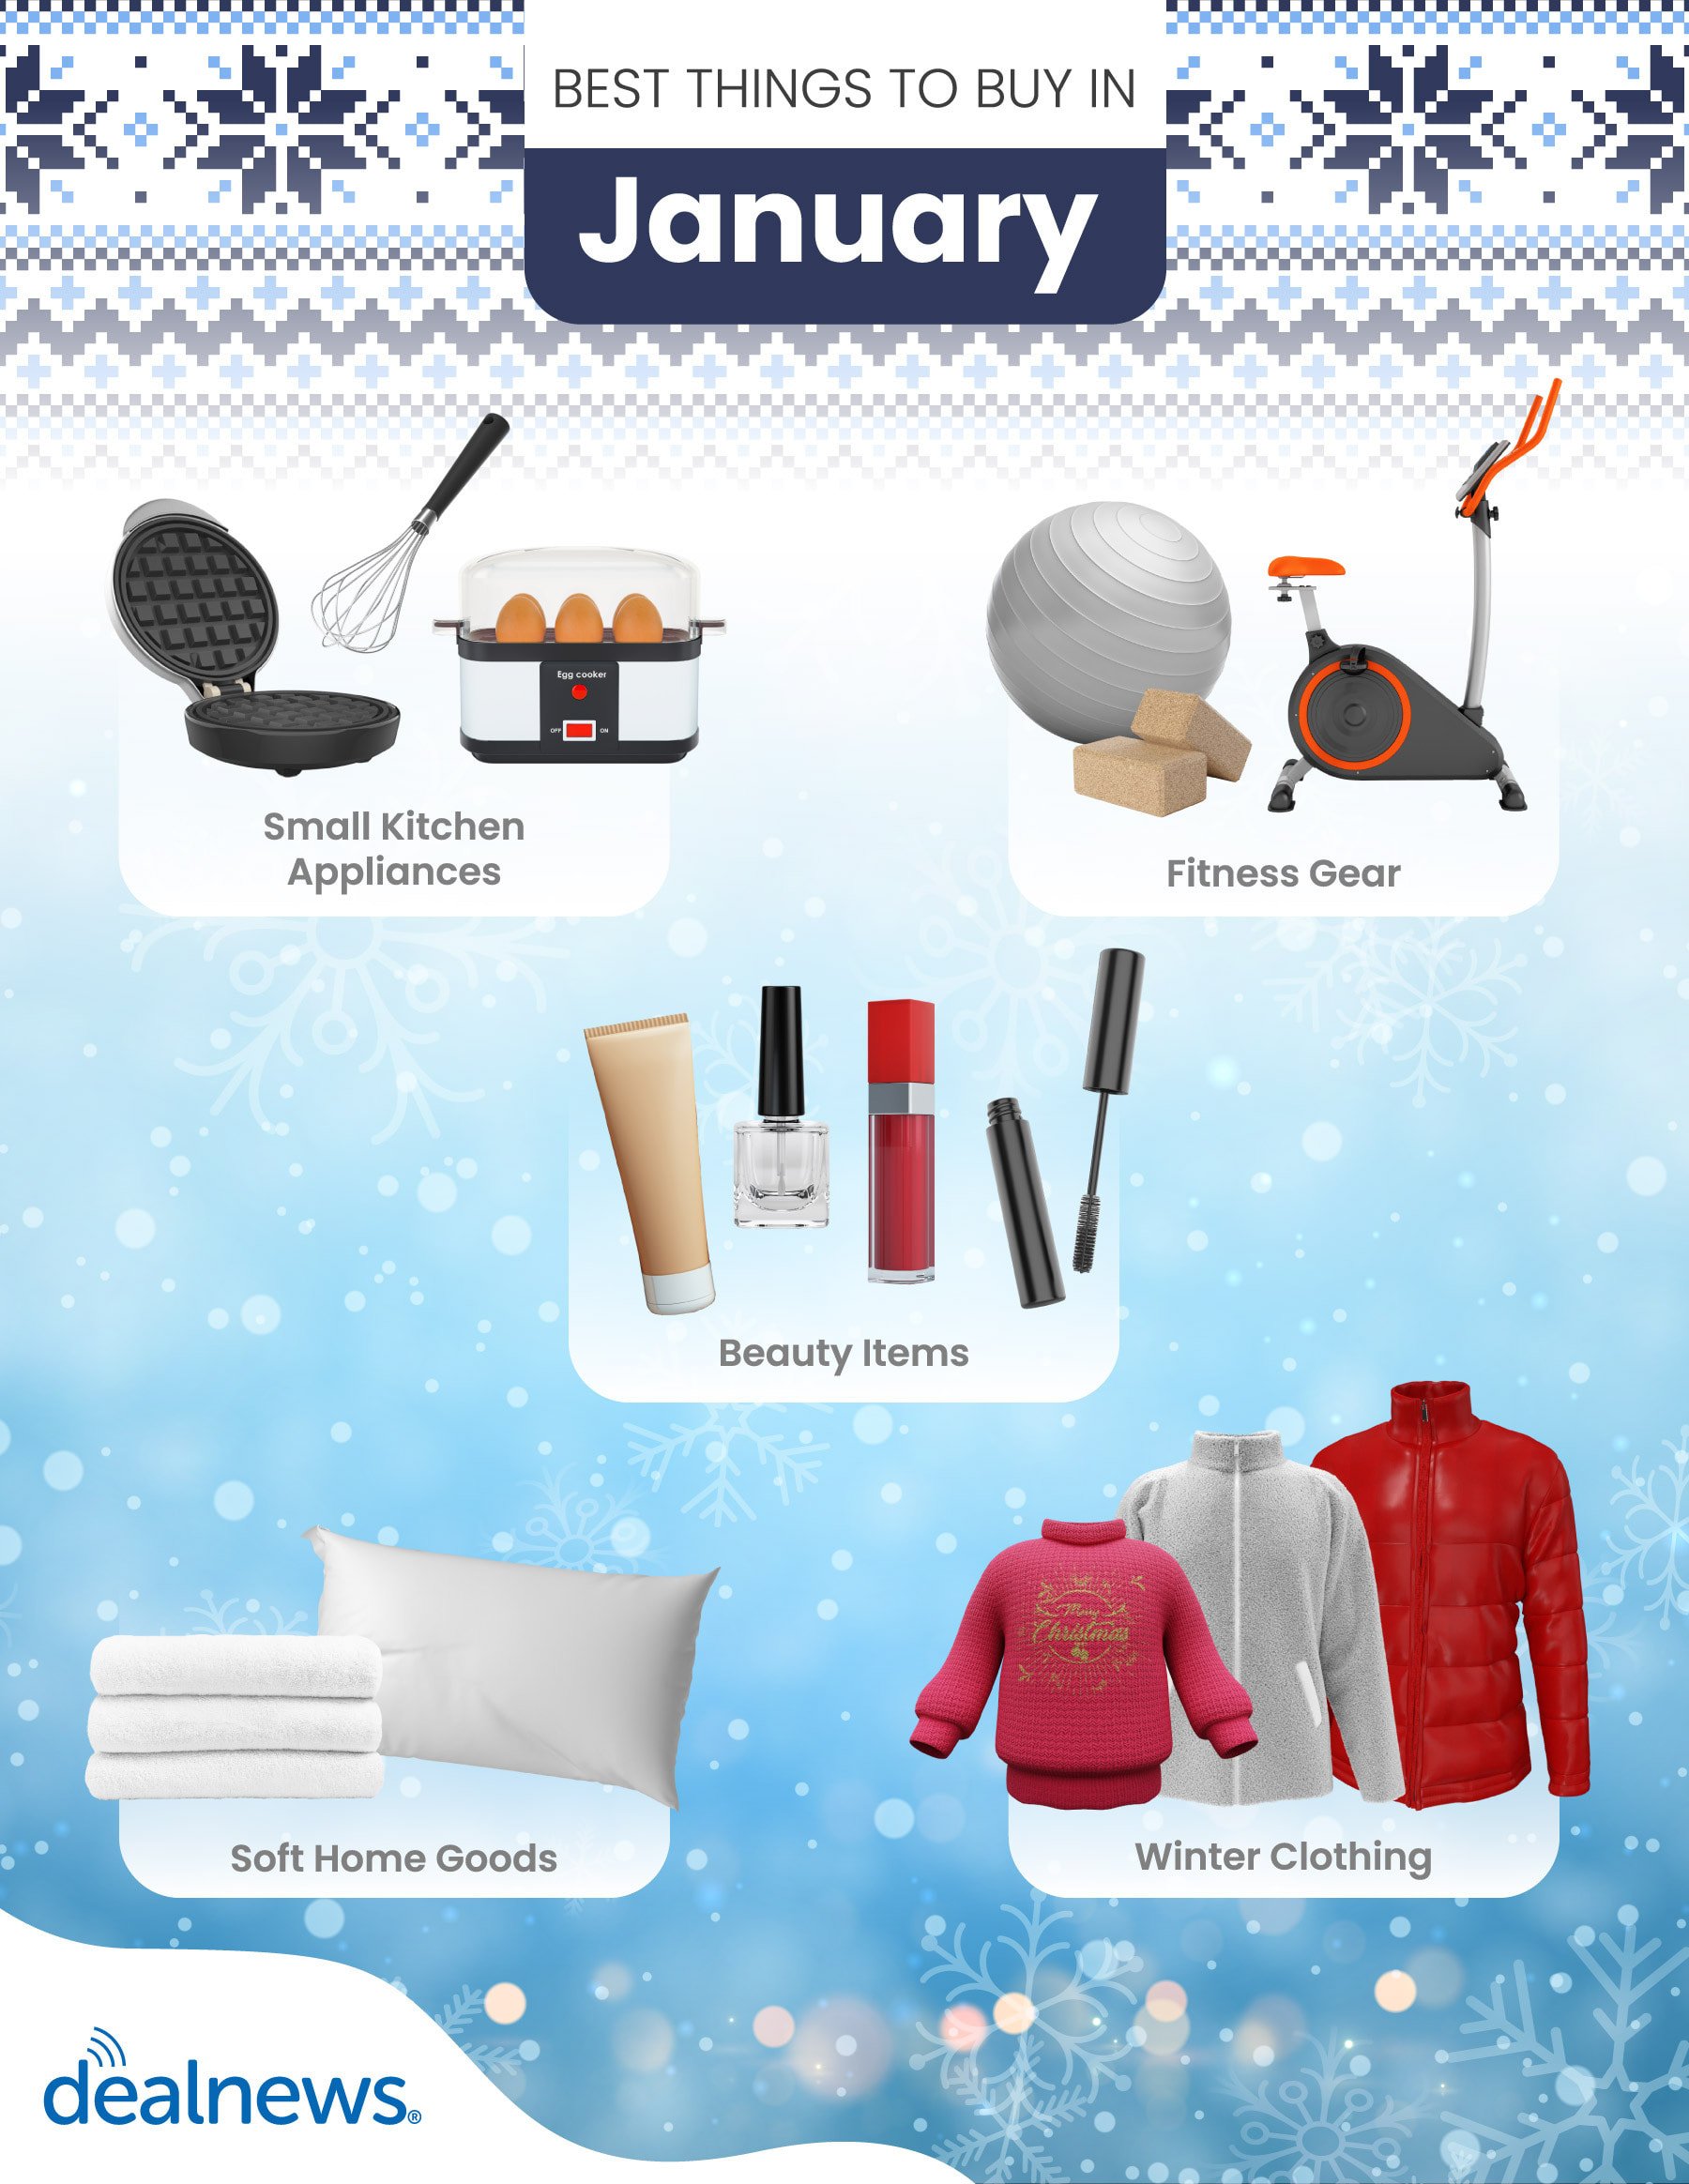 Five of the best things to buy in January depicted in an infographic.